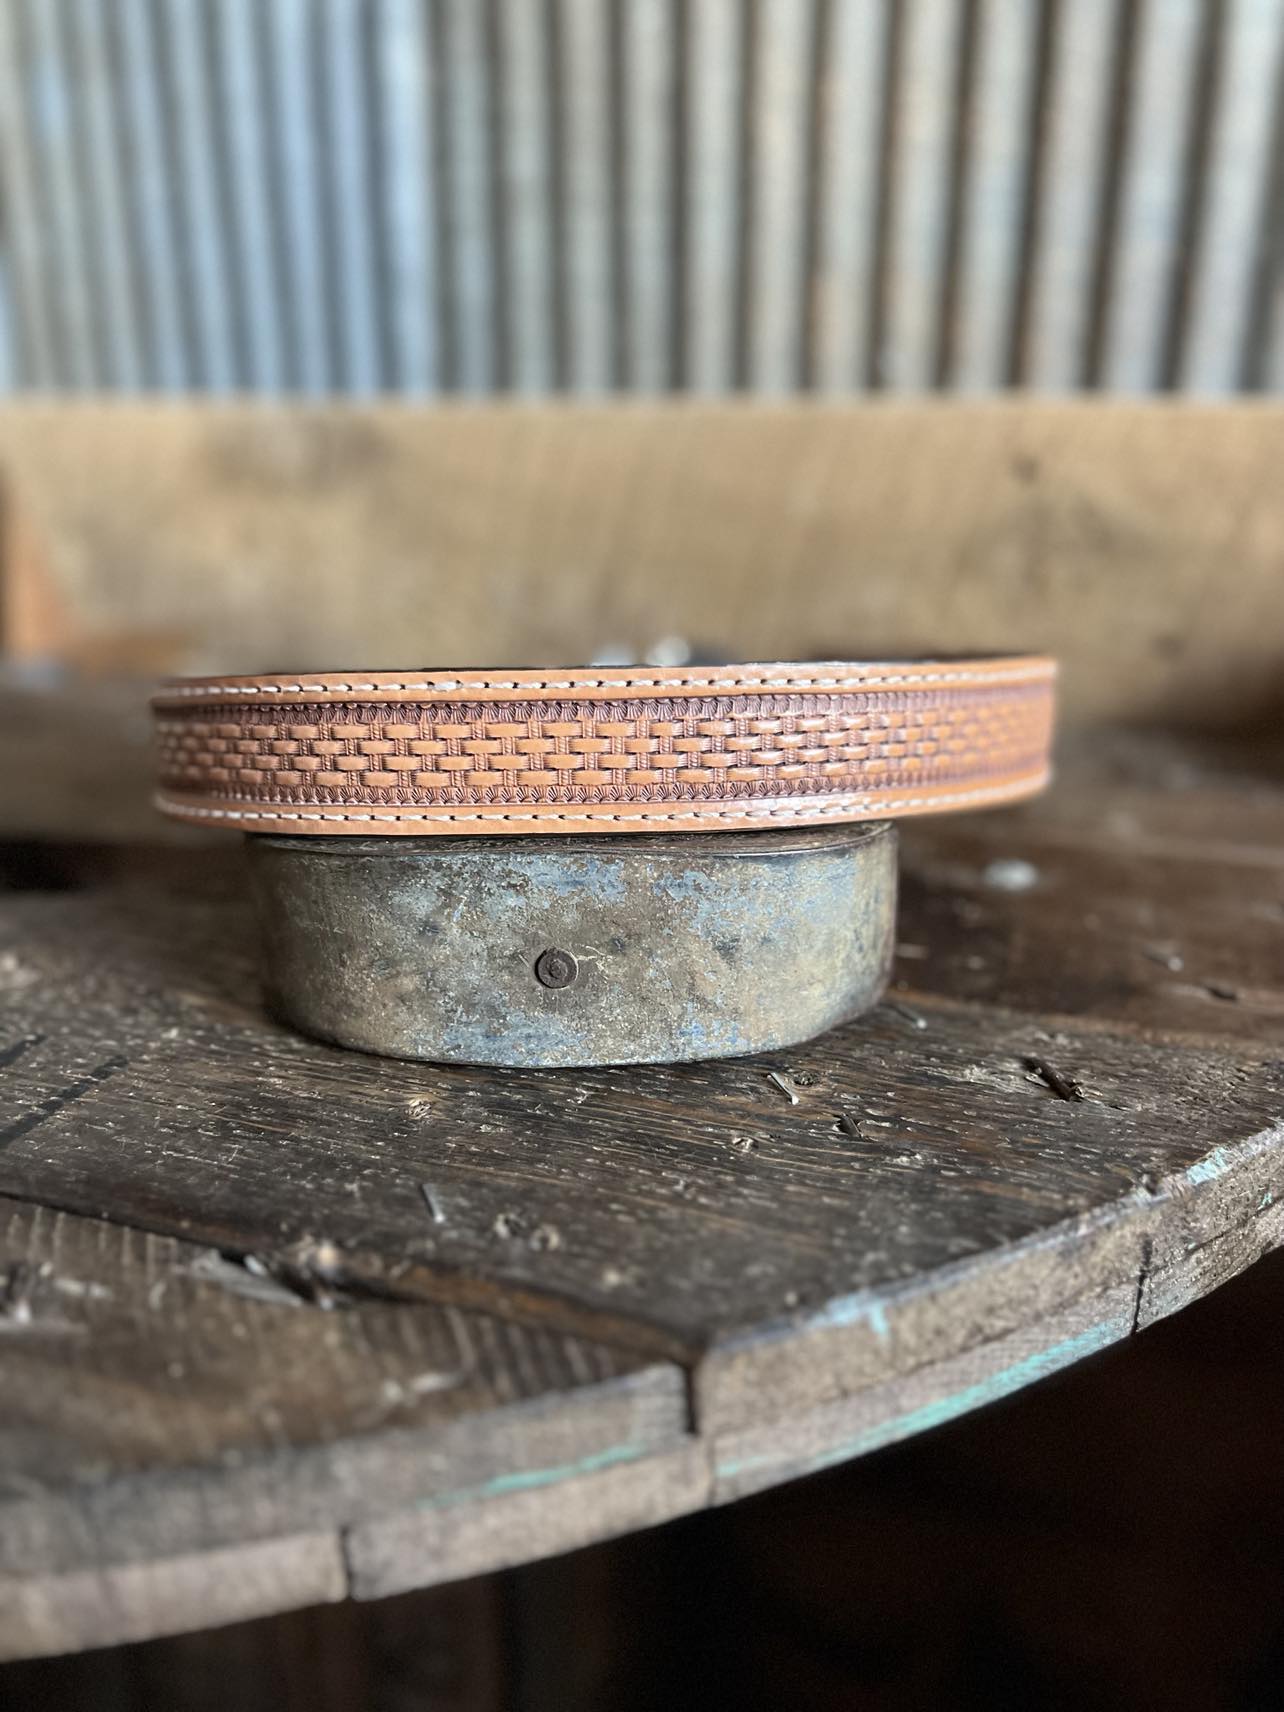 B574 - Straight Natural W/ Basketweave Tooling-Belts-DOUBLE J SADDLERY-Lucky J Boots & More, Women's, Men's, & Kids Western Store Located in Carthage, MO